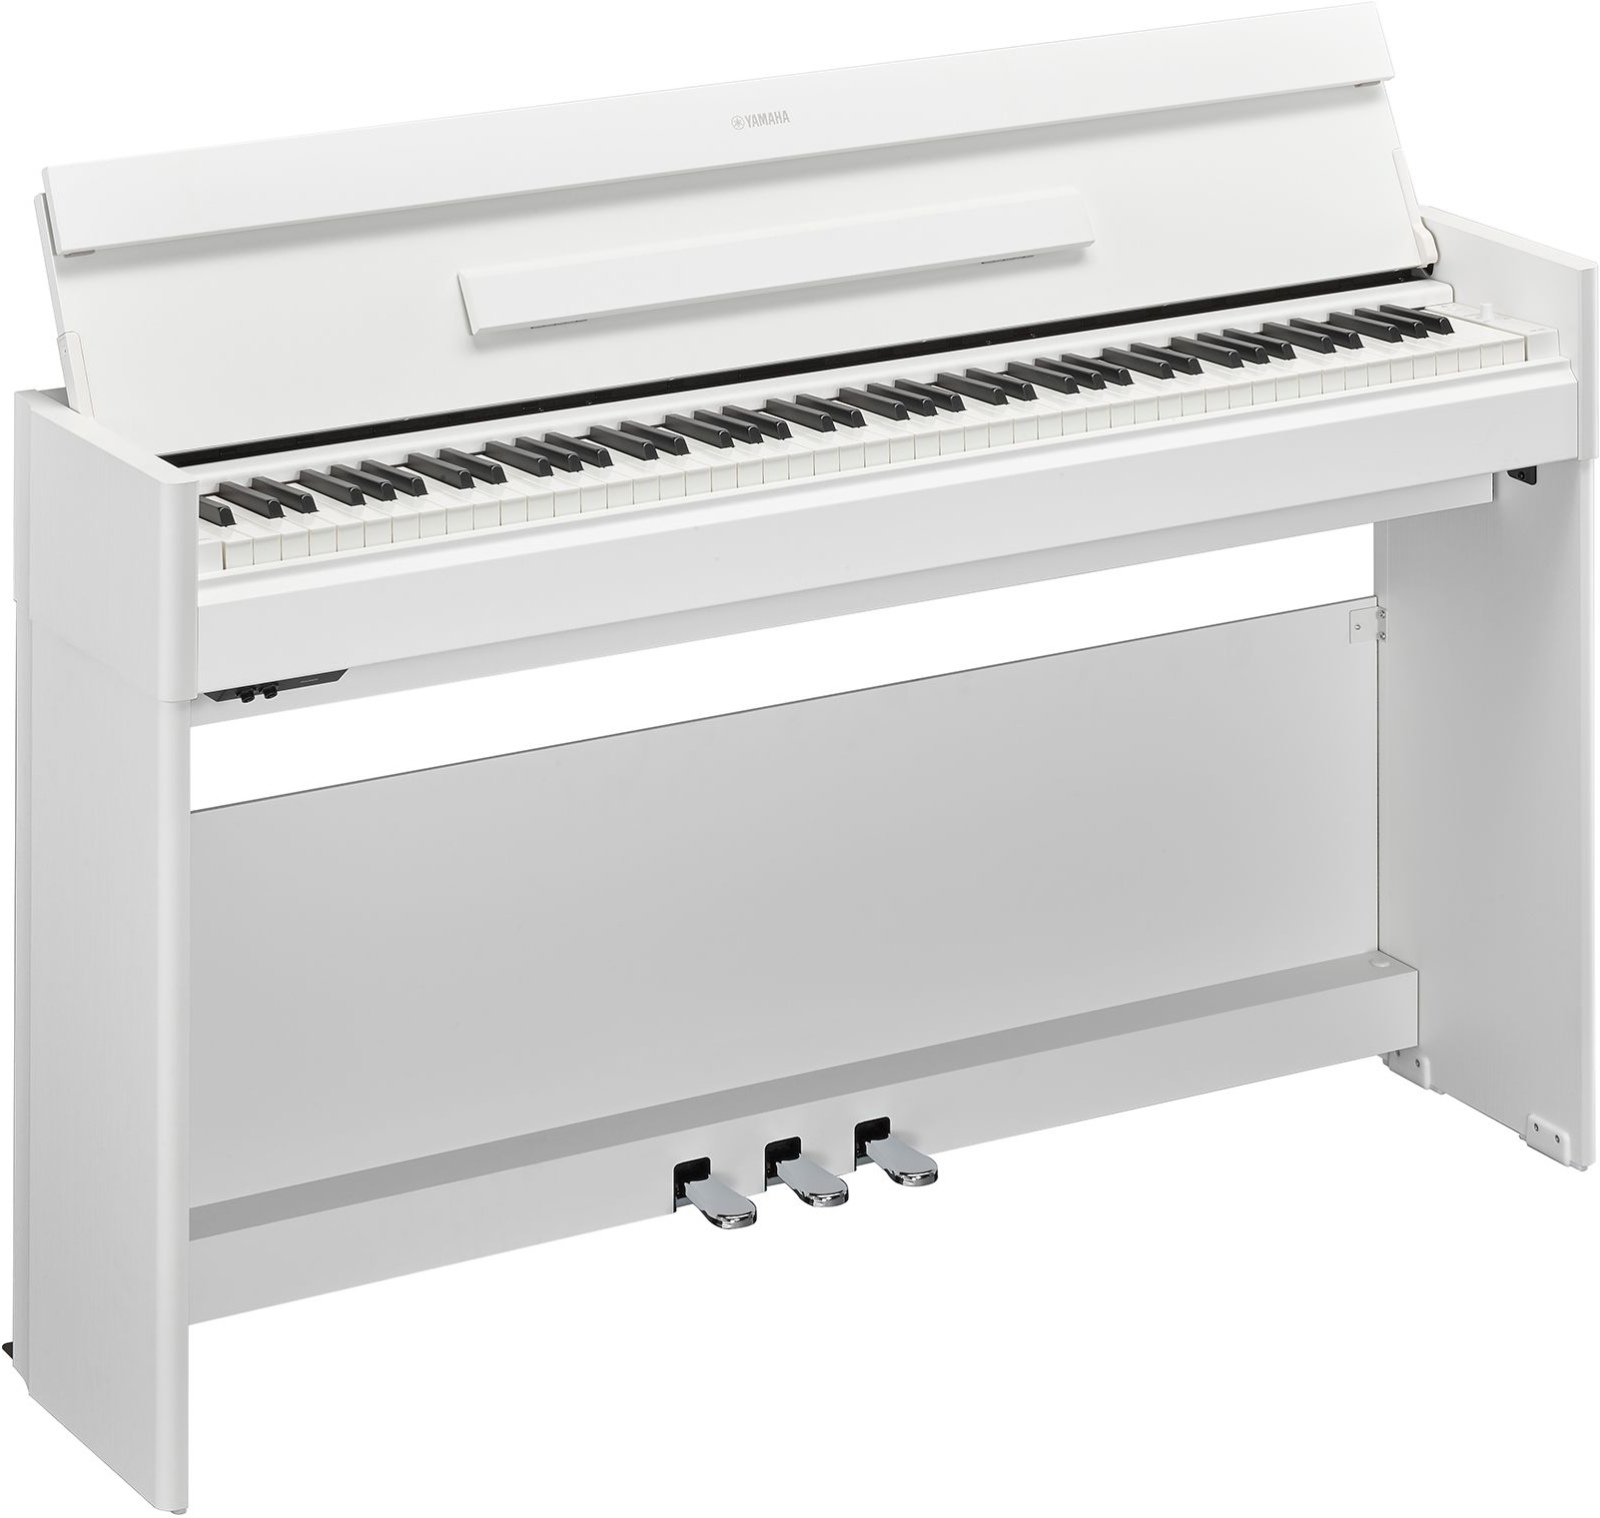 Yamaha Ydp-s55 Wh - Digital piano with stand - Variation 1